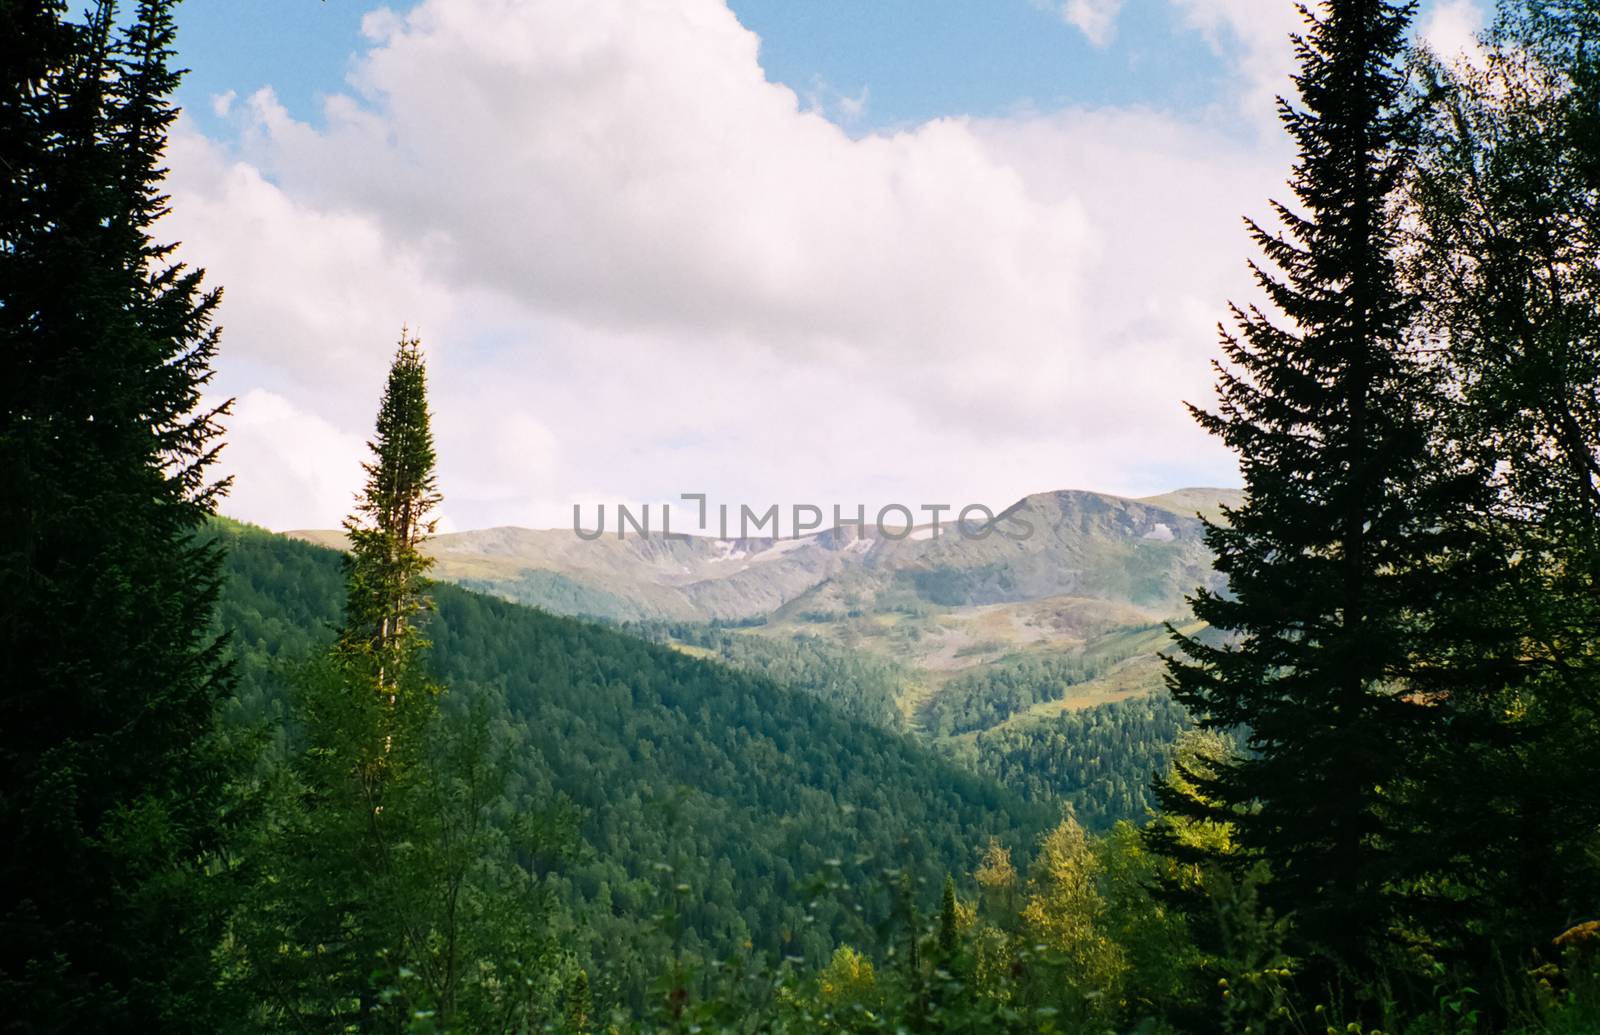 Landscape of the altai forests. Coniferous forests on the Altai.